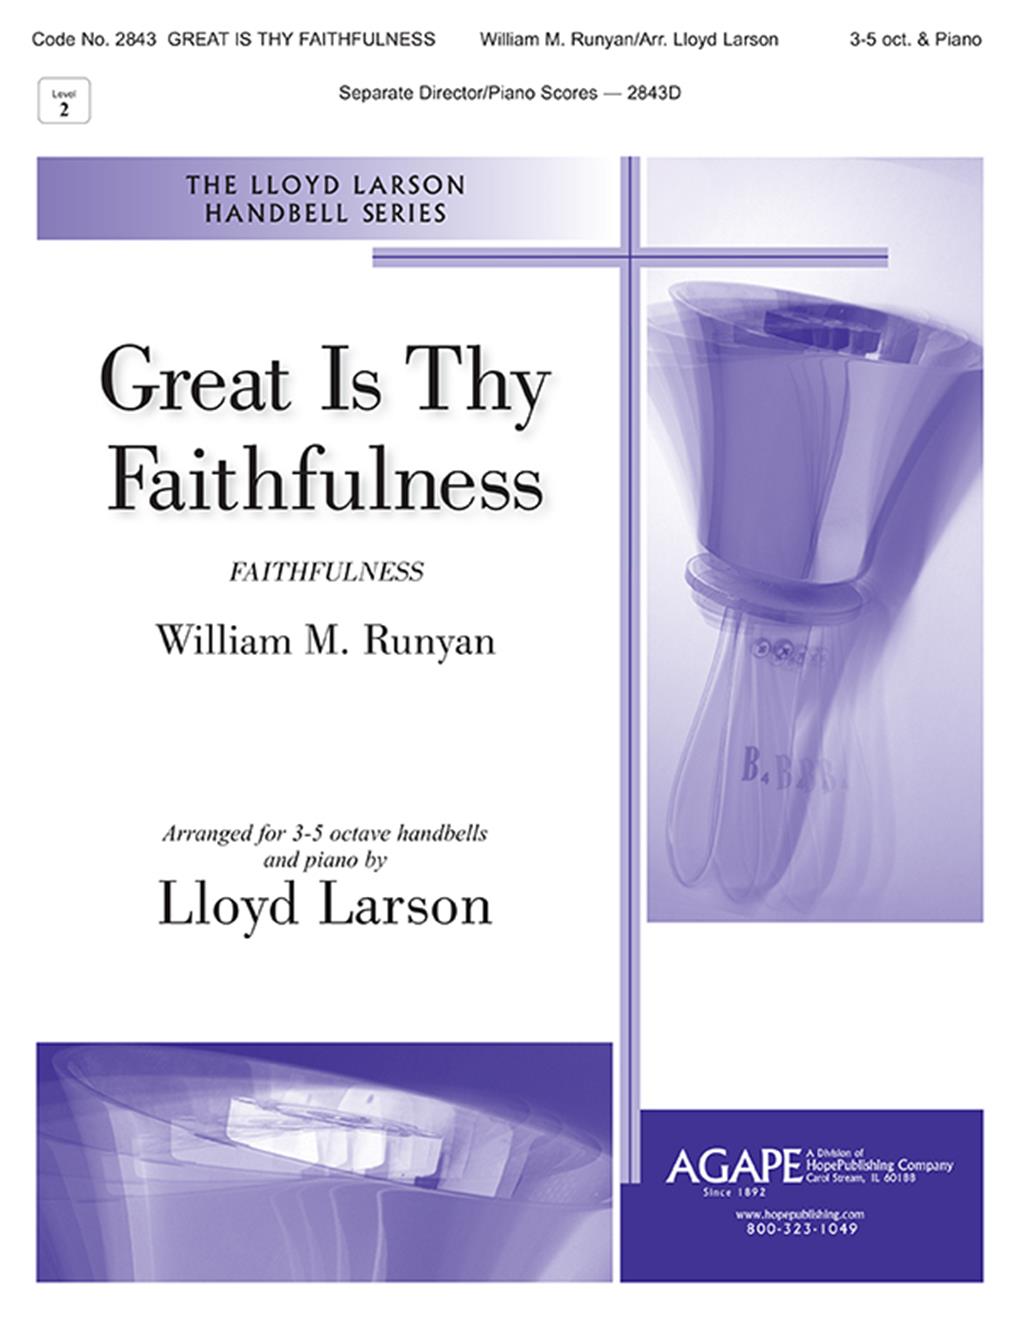 Great Is Thy Faithfulness - 3-5 oct. and piano Cover Image